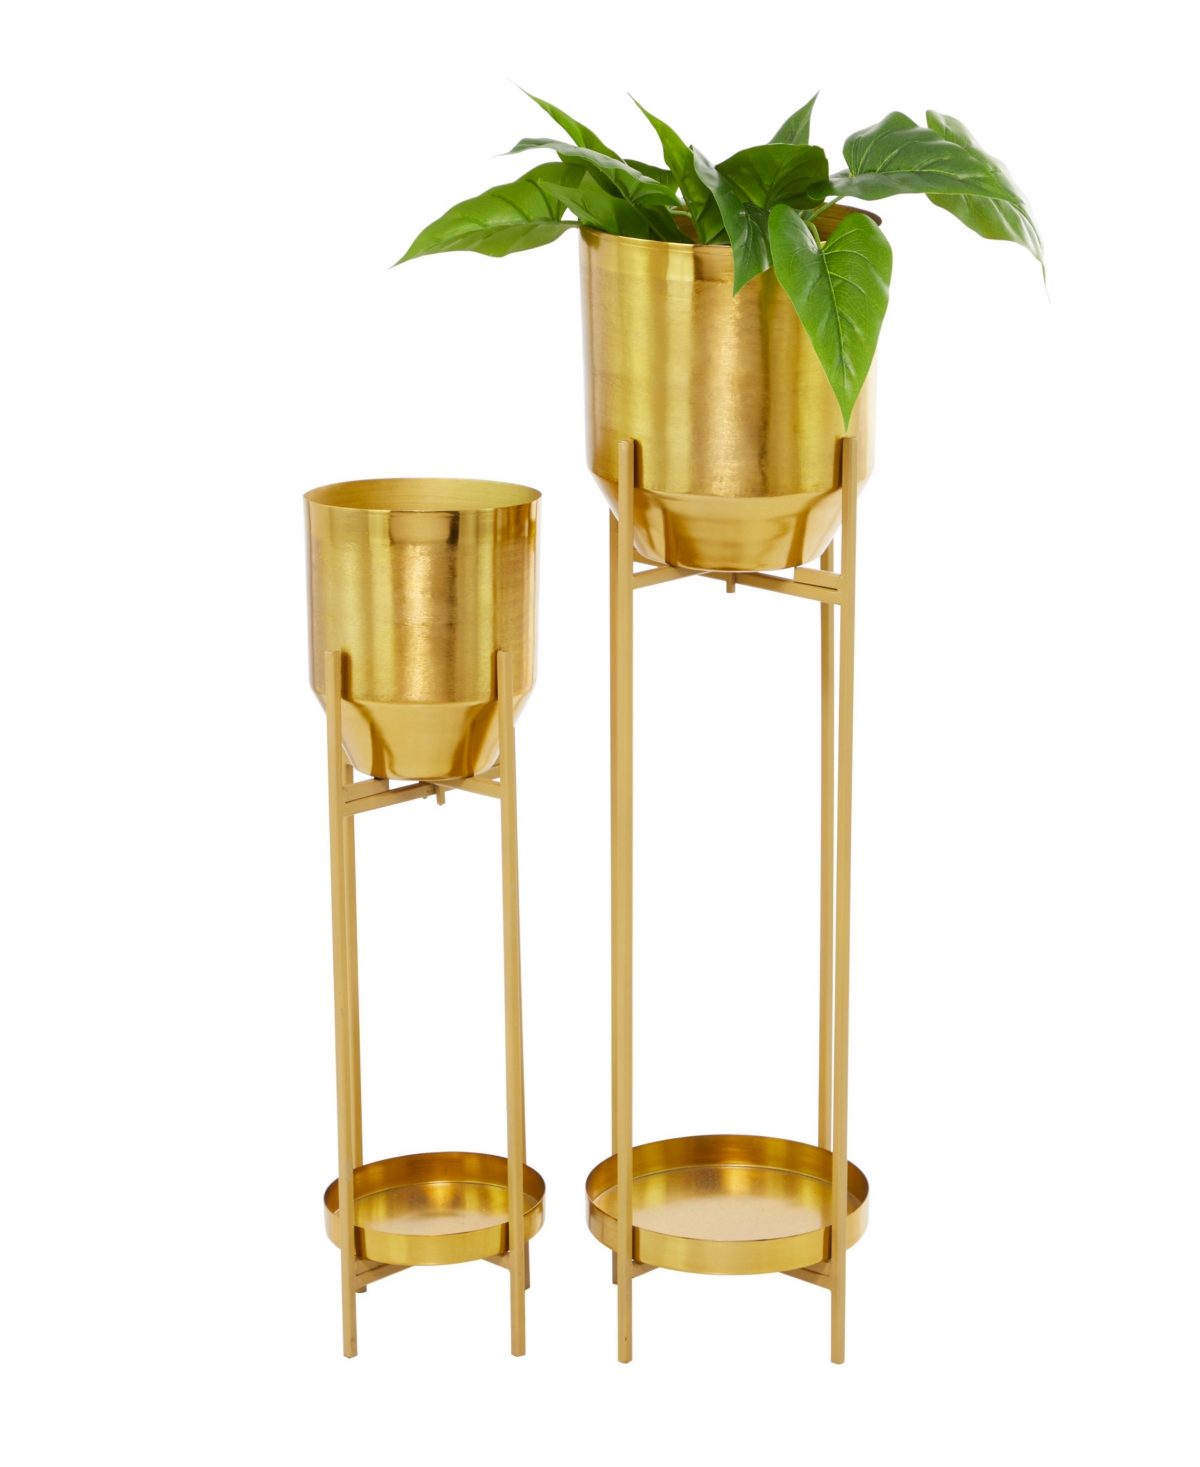 Gold-Tone Metal Planter with Removable Stand Set of 2 - Gold